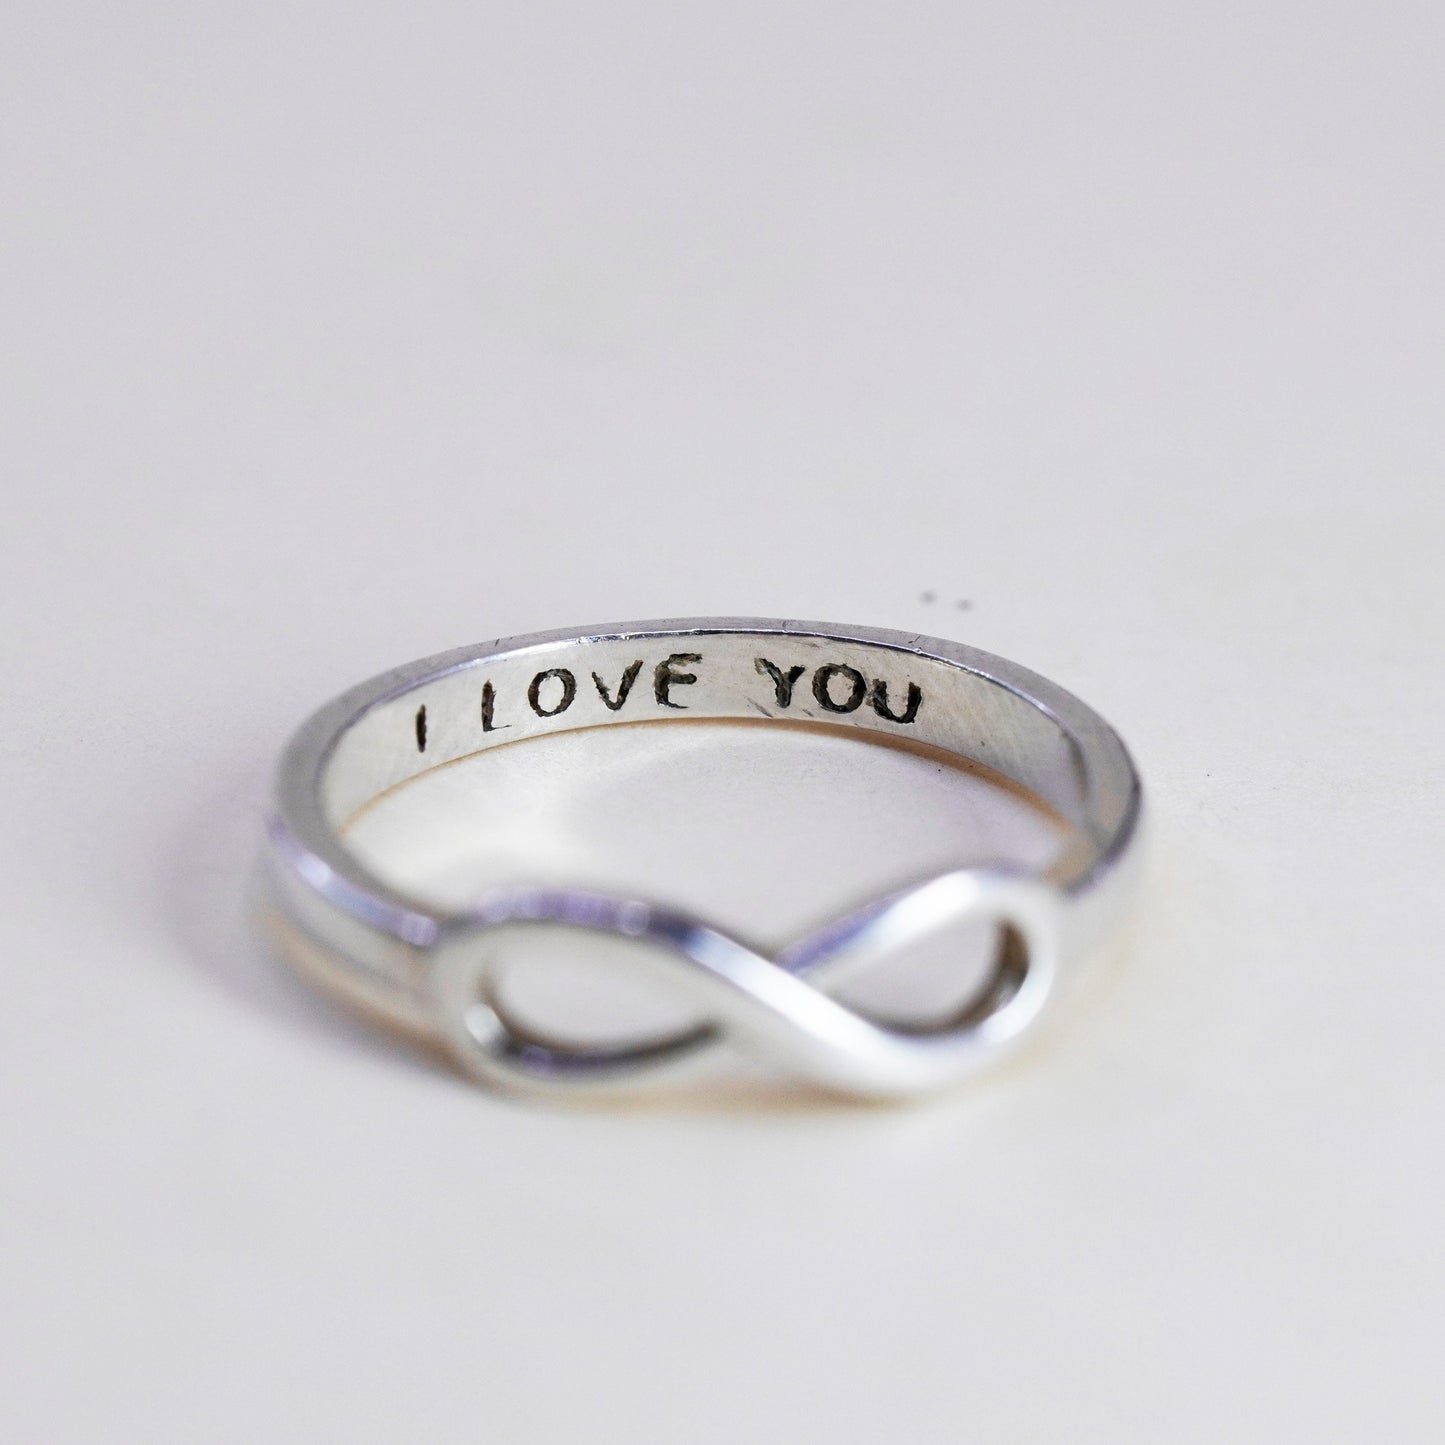 Size 6, vtg Sterling 925 silver handmade infinity loop band ring “I love you”